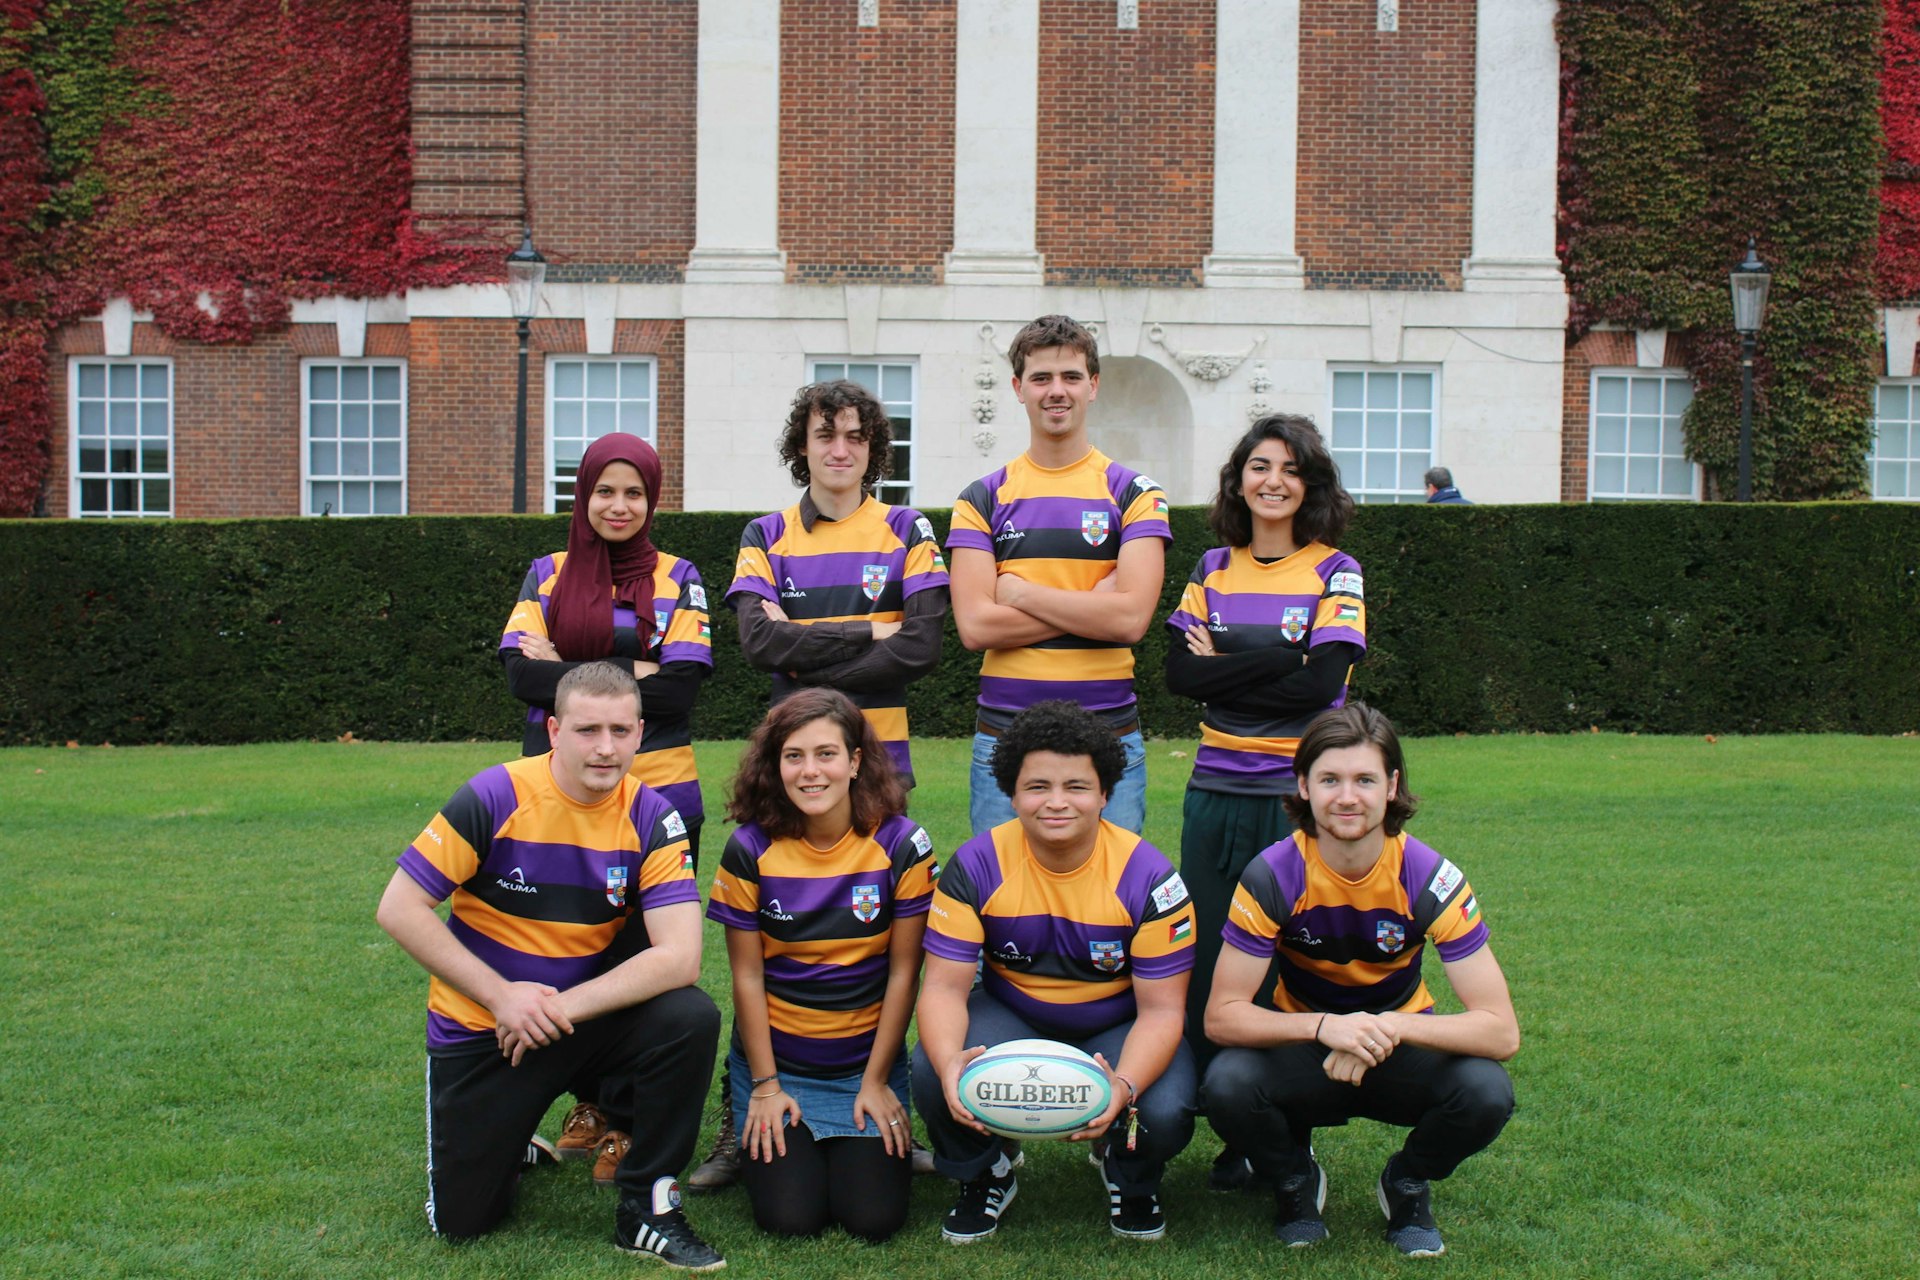 Why Goldsmiths University rugby players are right to wear the Palestinian flag